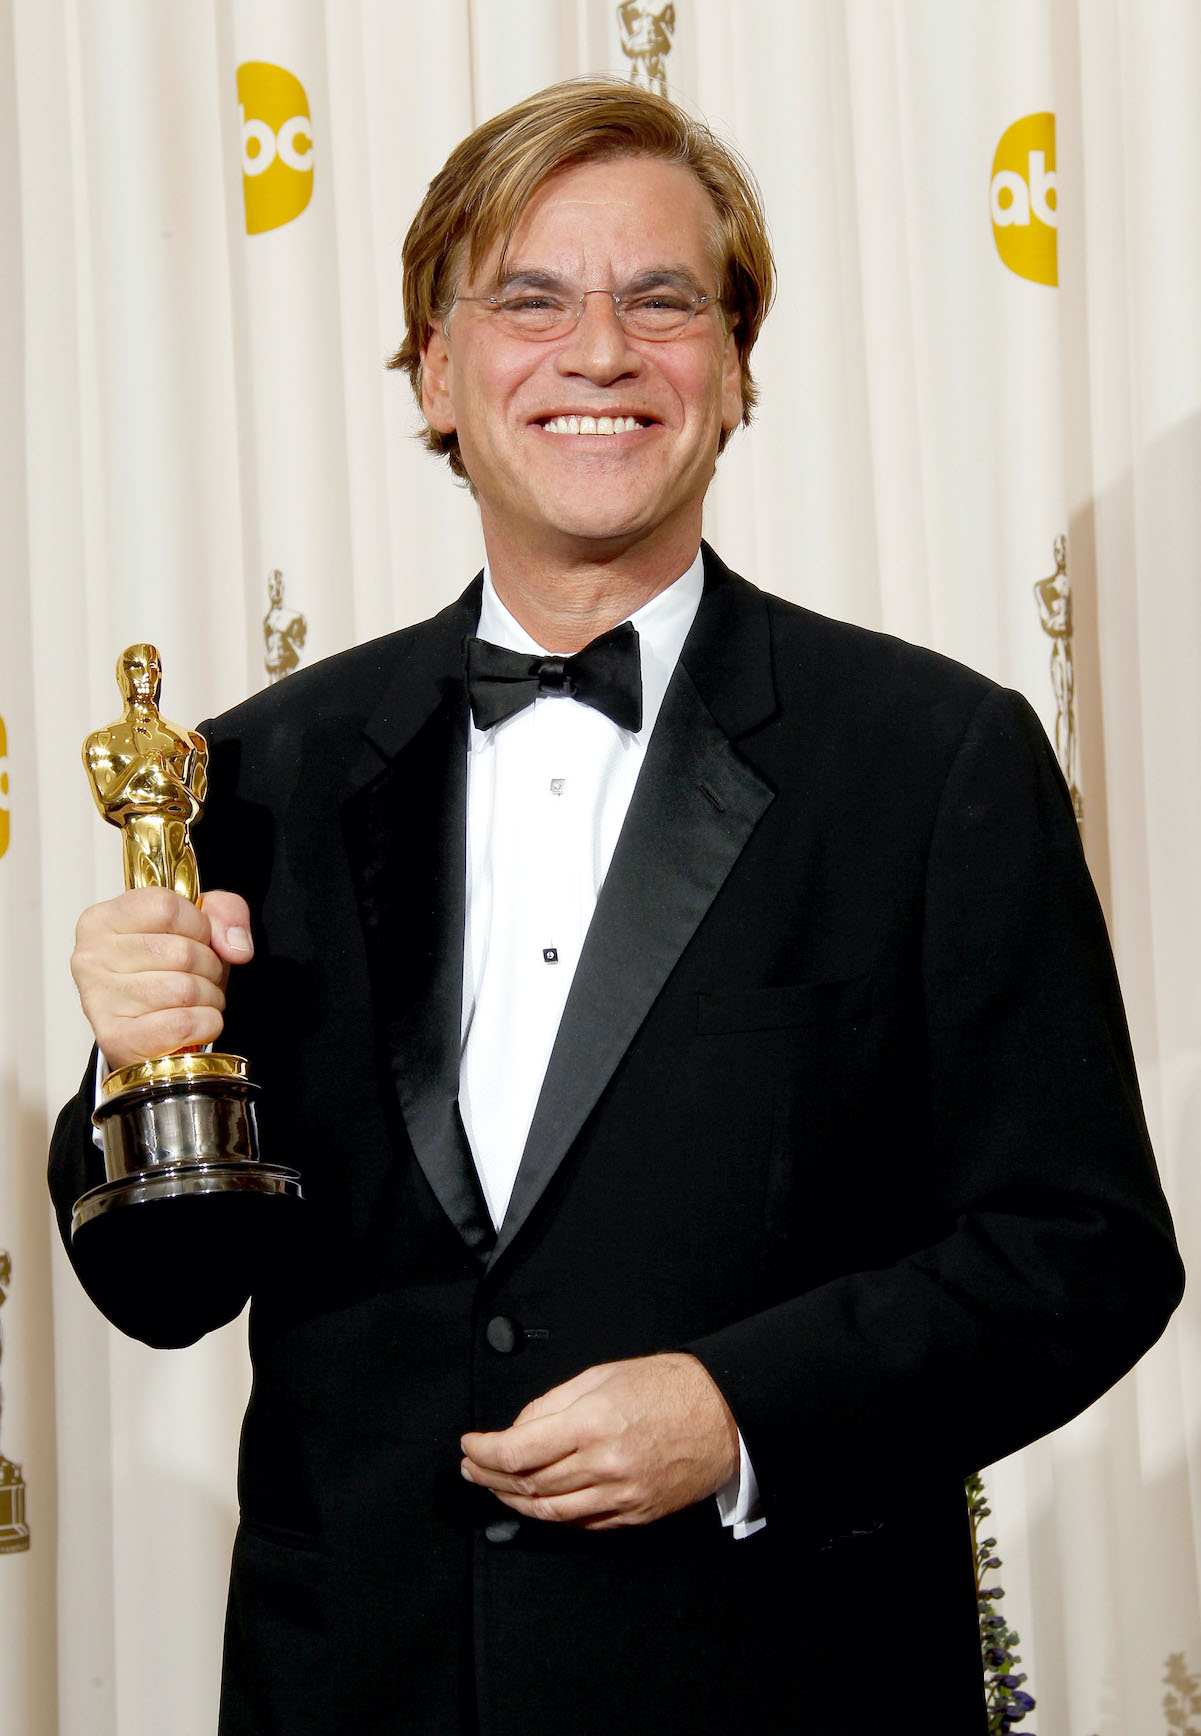 Aaron Sorkin poses with his Oscar statue winning Best Adapted Screenplay for 'The Social Network' in 2011